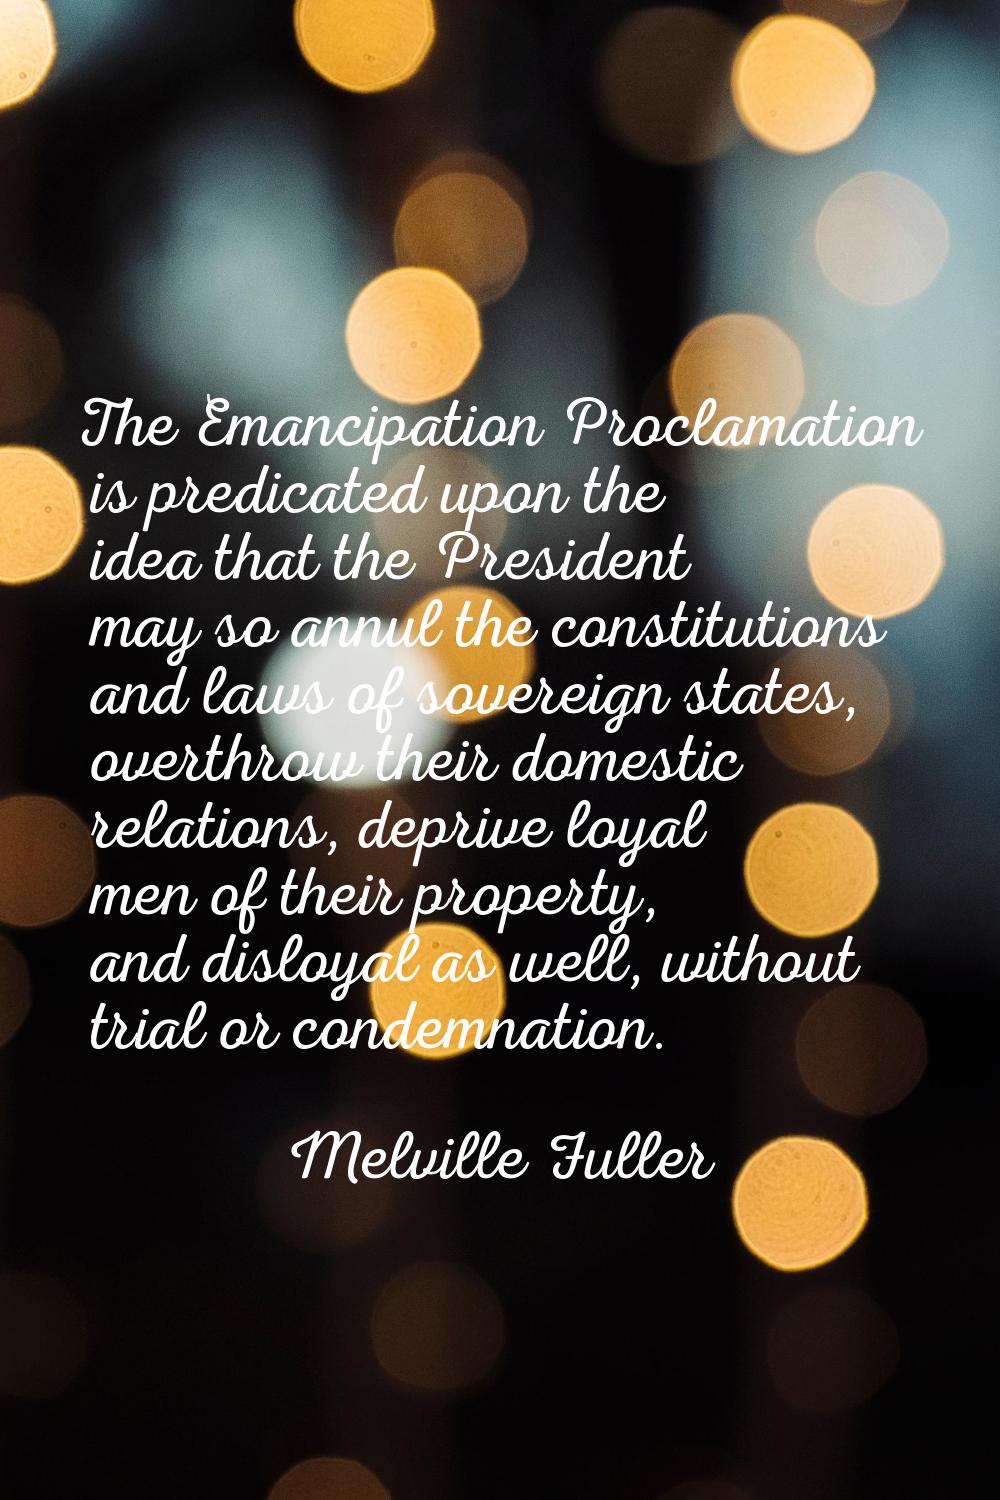 The Emancipation Proclamation is predicated upon the idea that the President may so annul the const